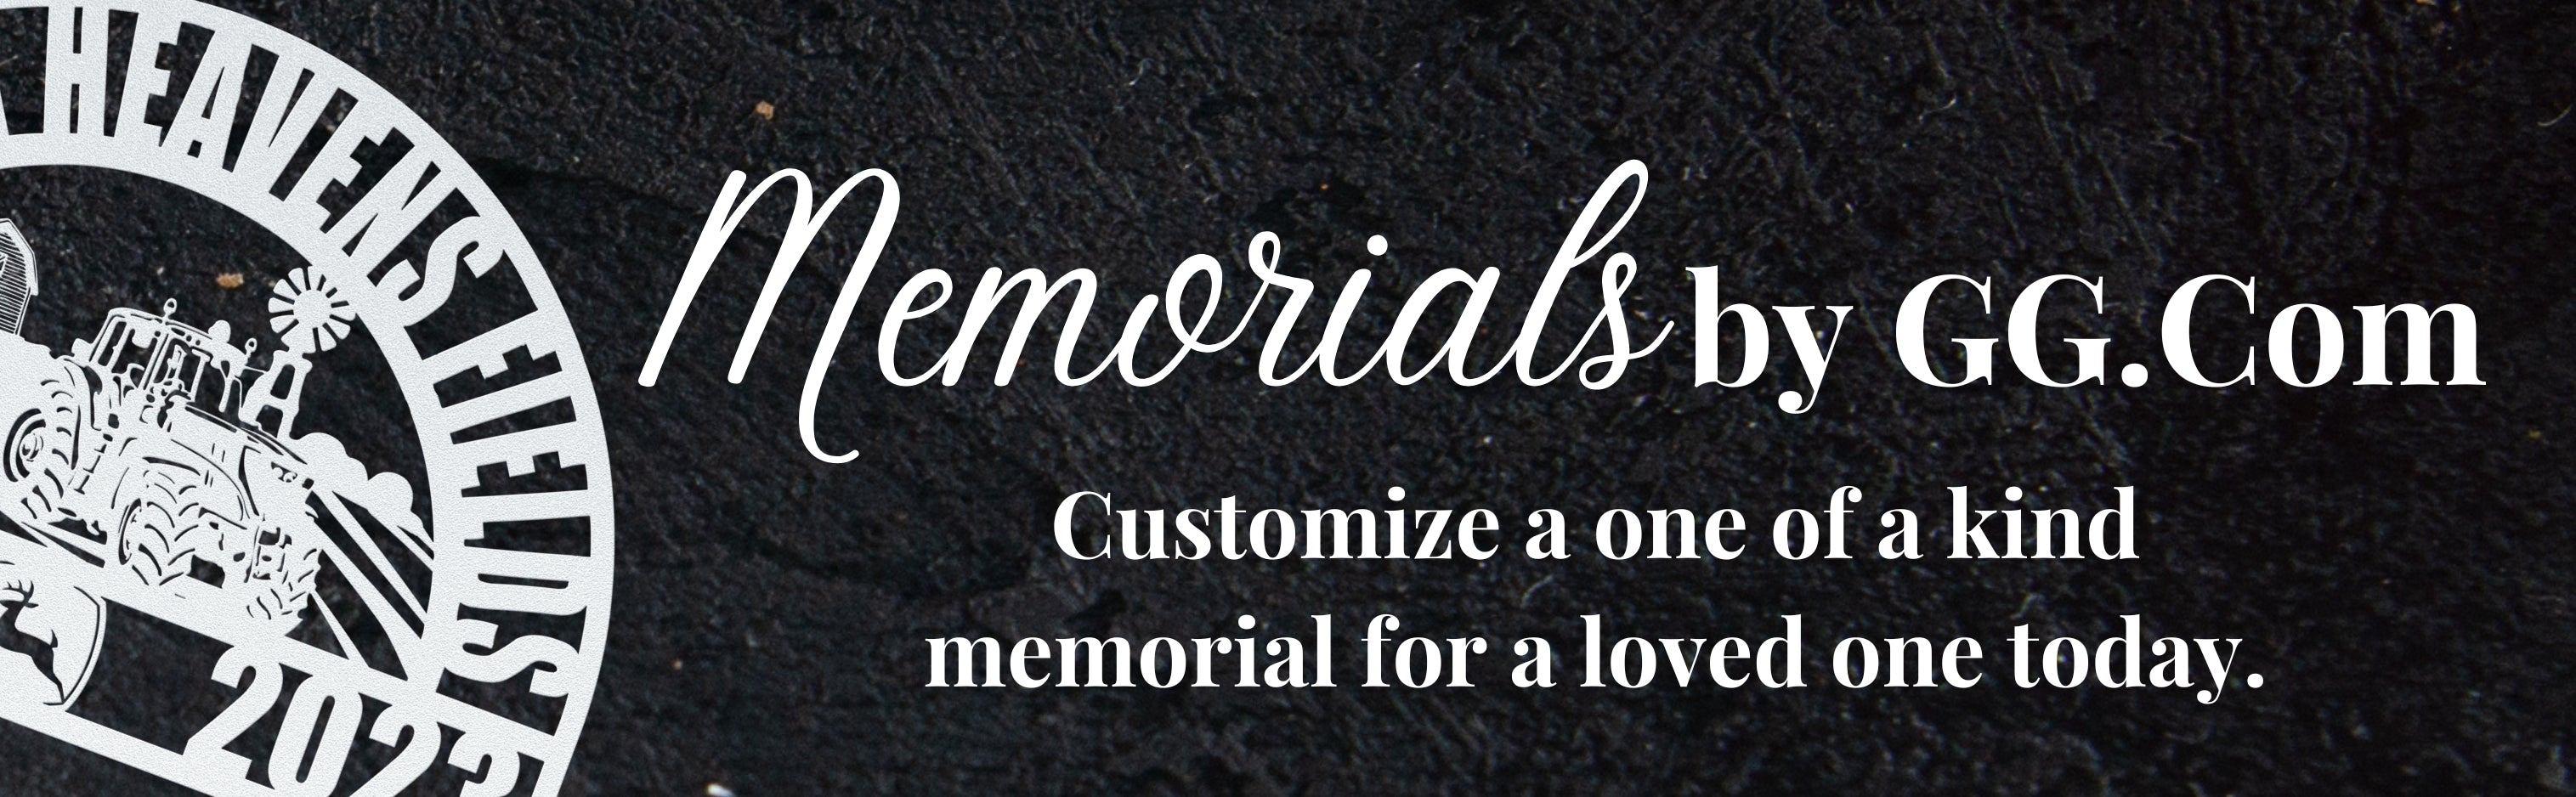 memorials by gg personalized memorial gifts